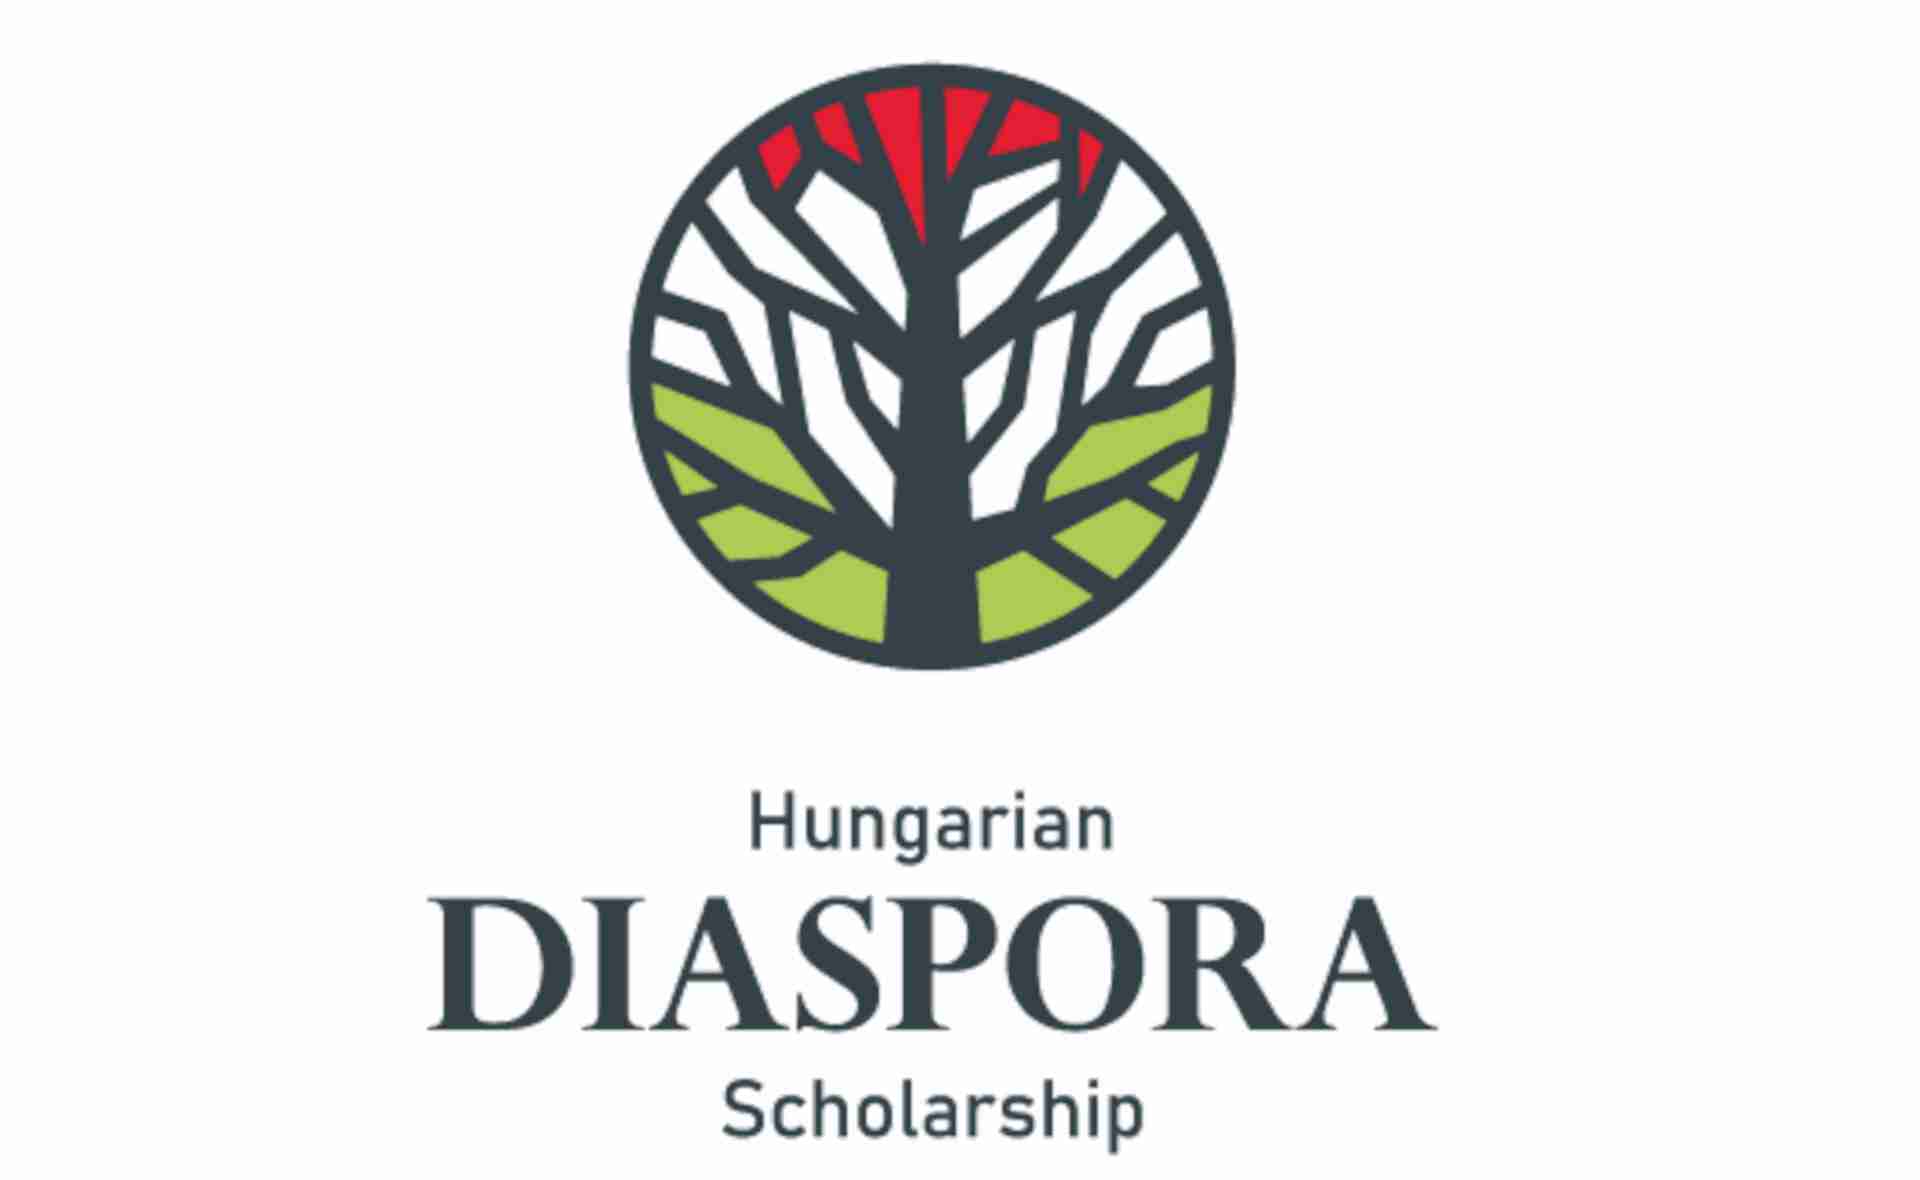 The application for the Hungarian Diaspora Scholarship is now open!